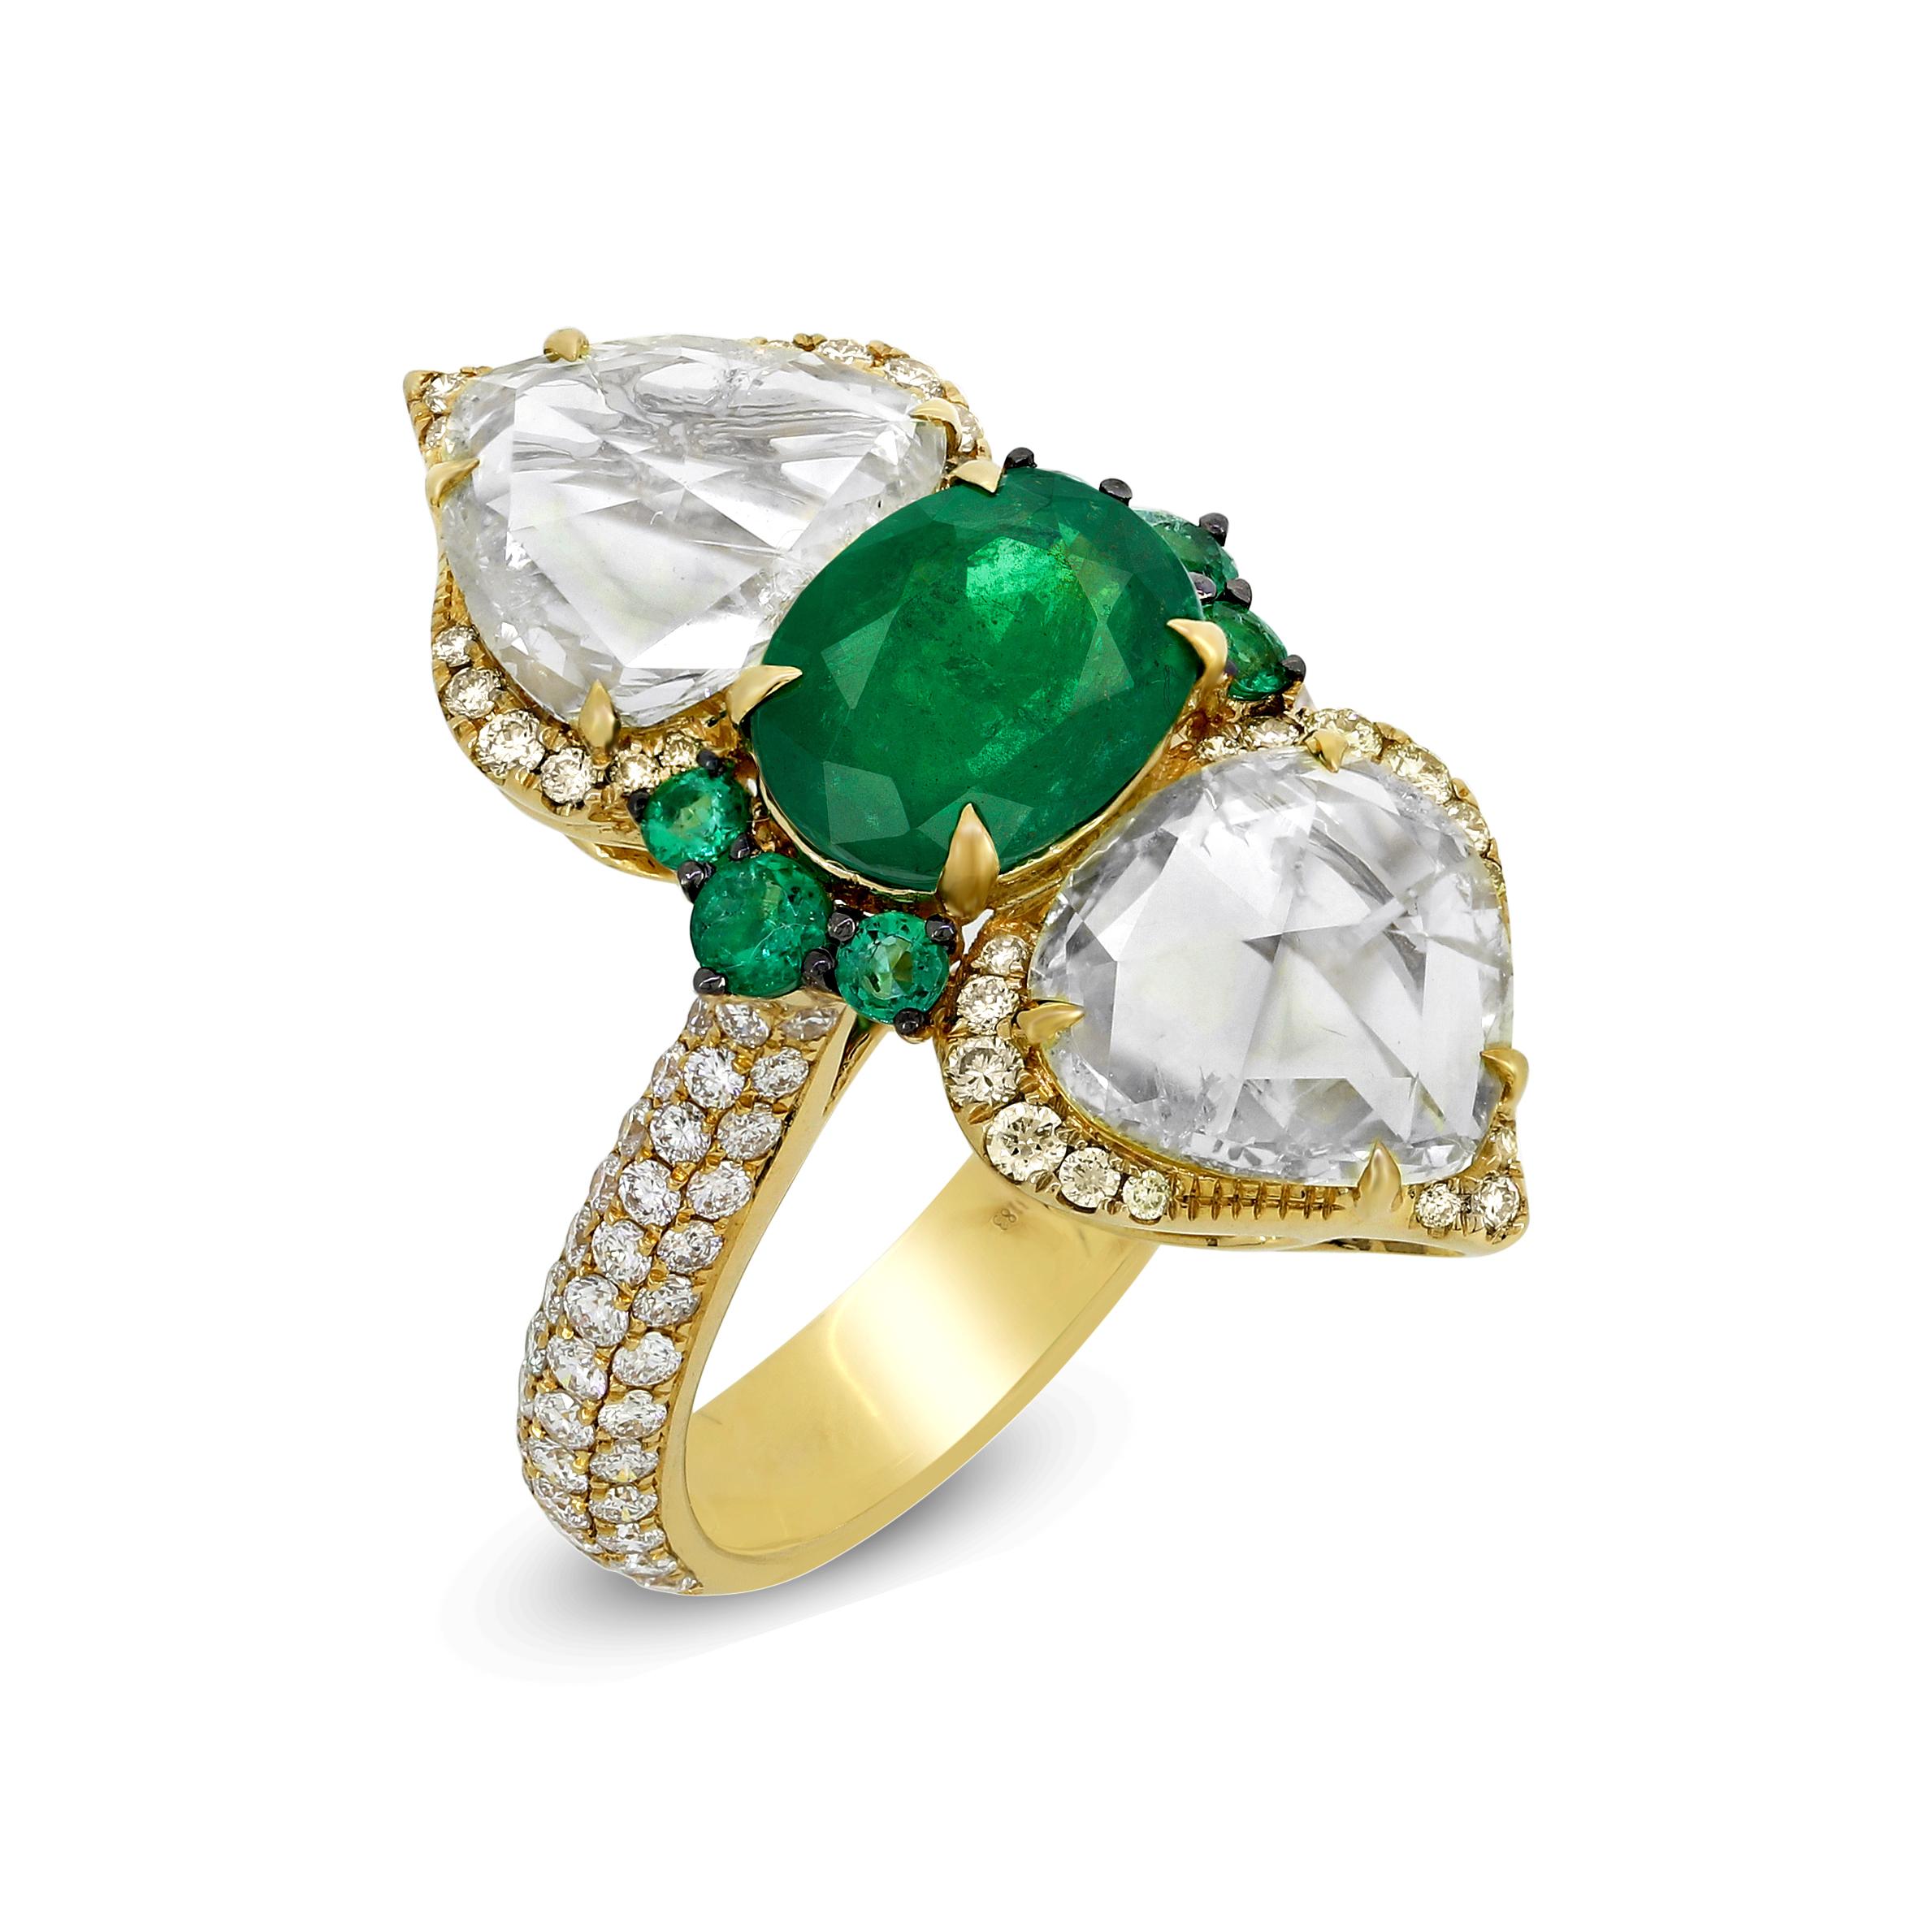 If you are look for unconventional charm in your jewelry then this exclusive Emerald and rose cut diamond 18k Yellow Gold ring has to be a part of your collection. Paired with two large rose cut diamonds on each side, this versatile ring can be worn